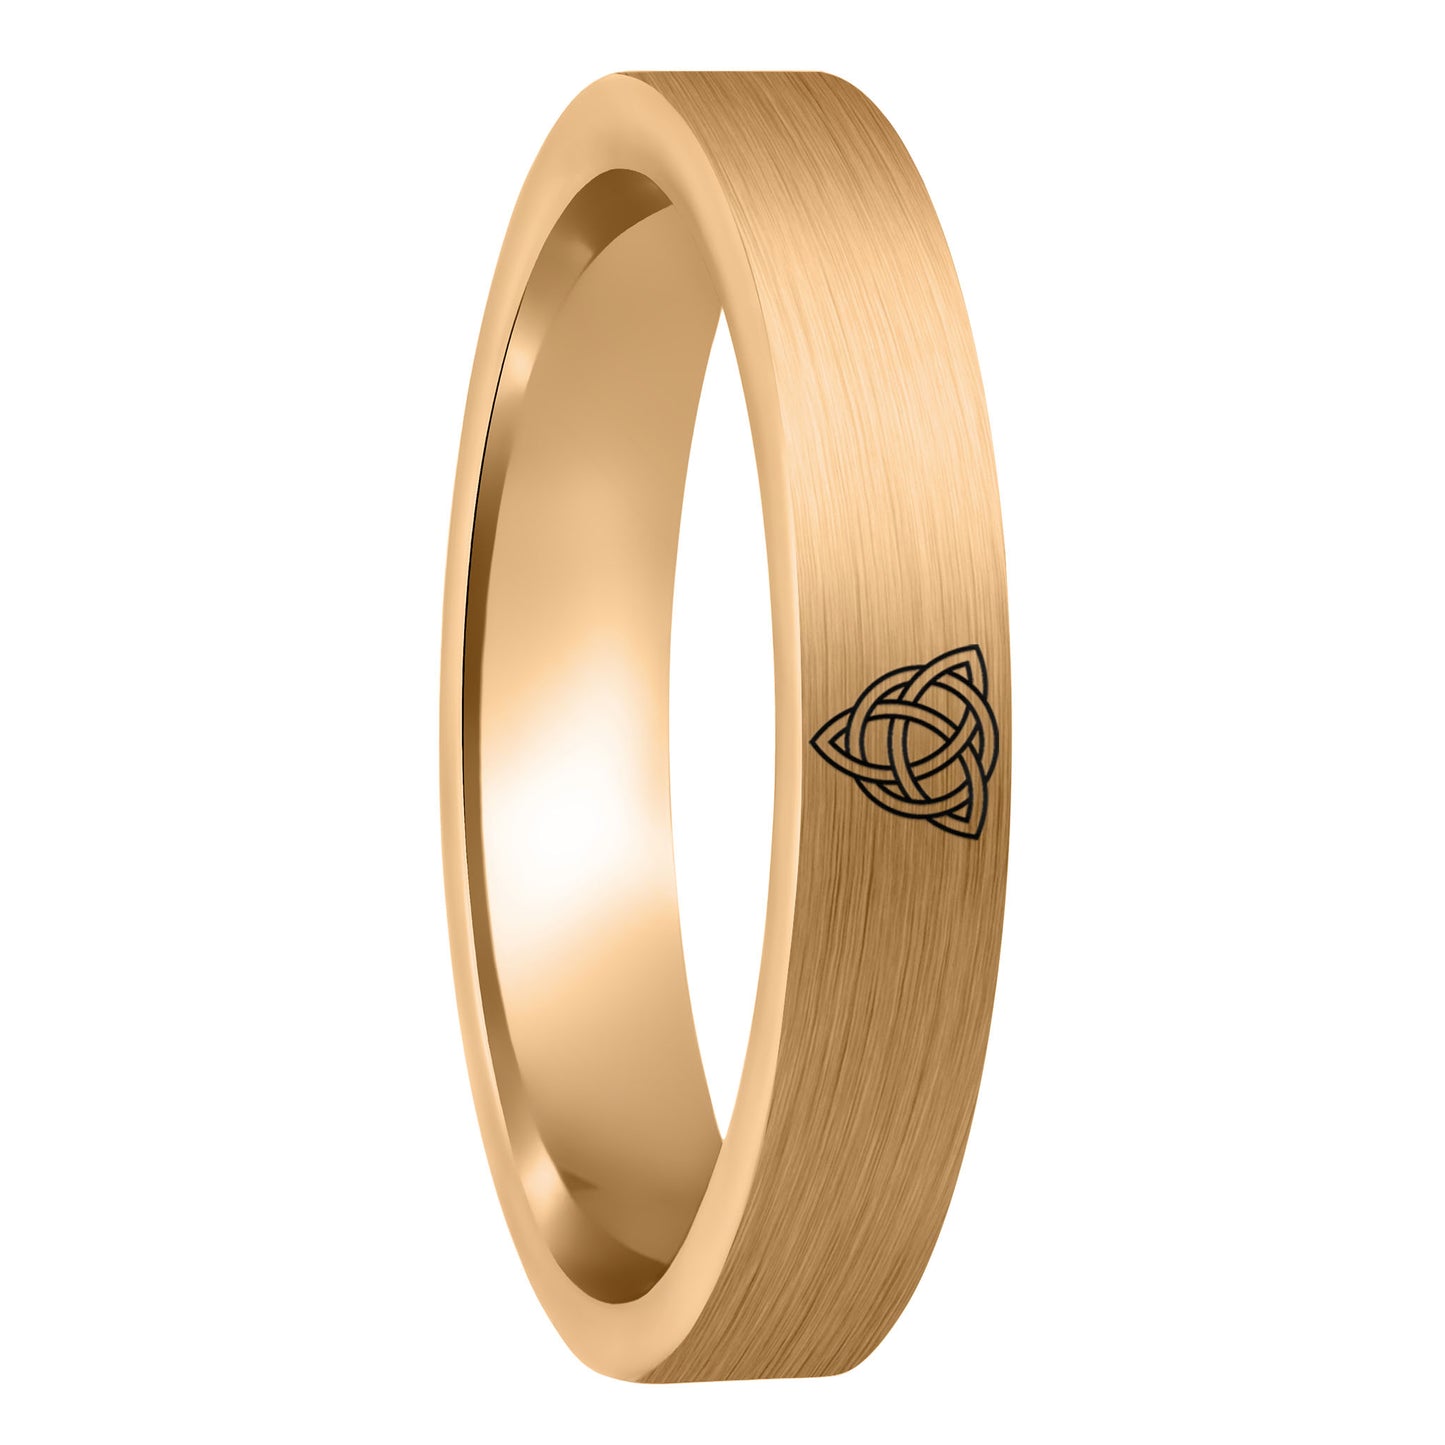 A celtic trinity knot brushed rose gold tungsten women's wedding band displayed on a plain white background.